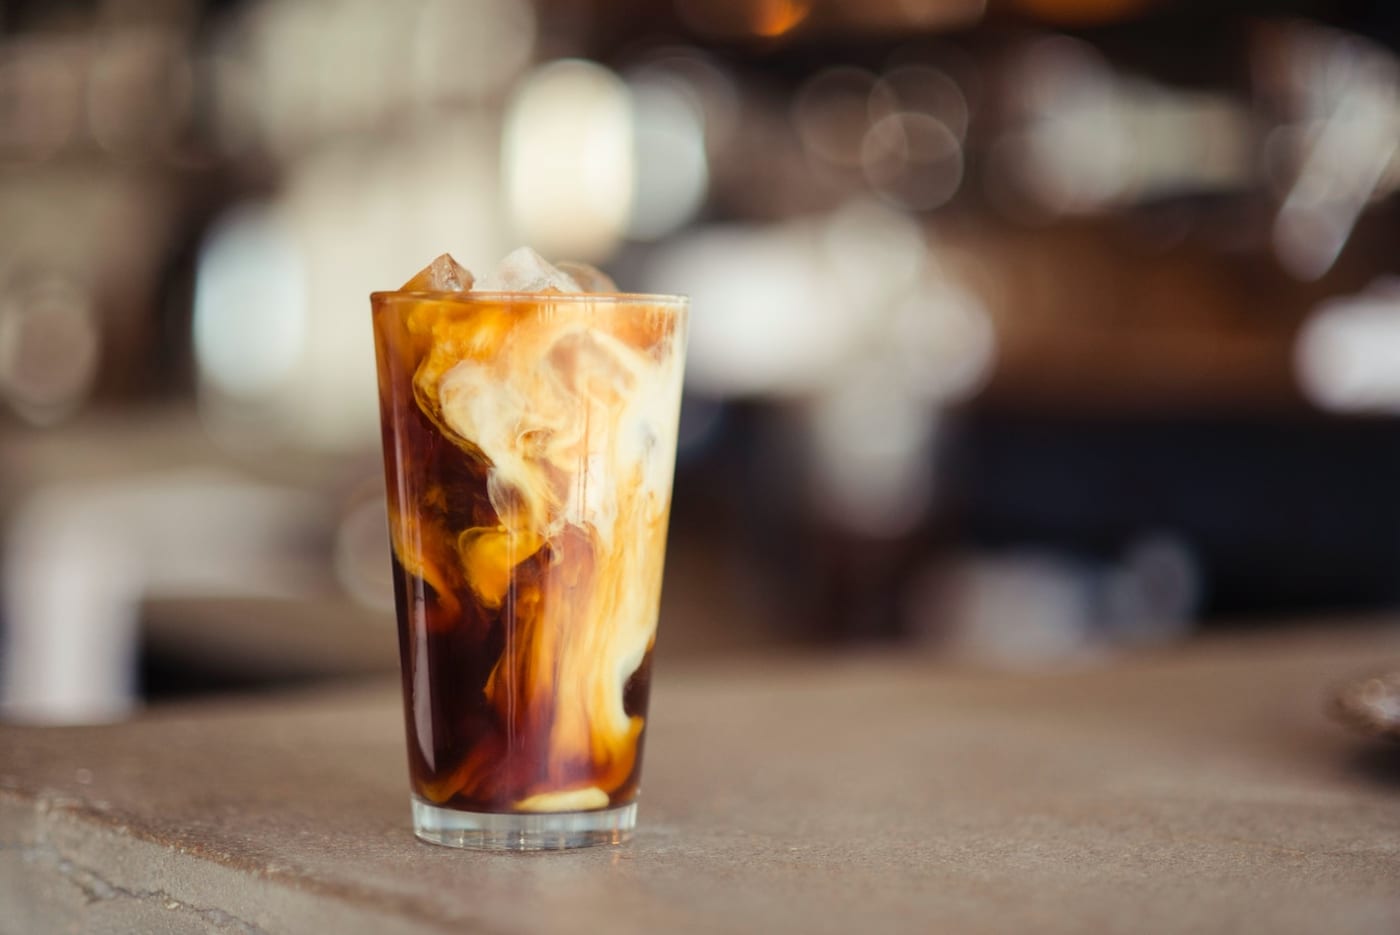 Everything You Need for Homemade Iced Coffee